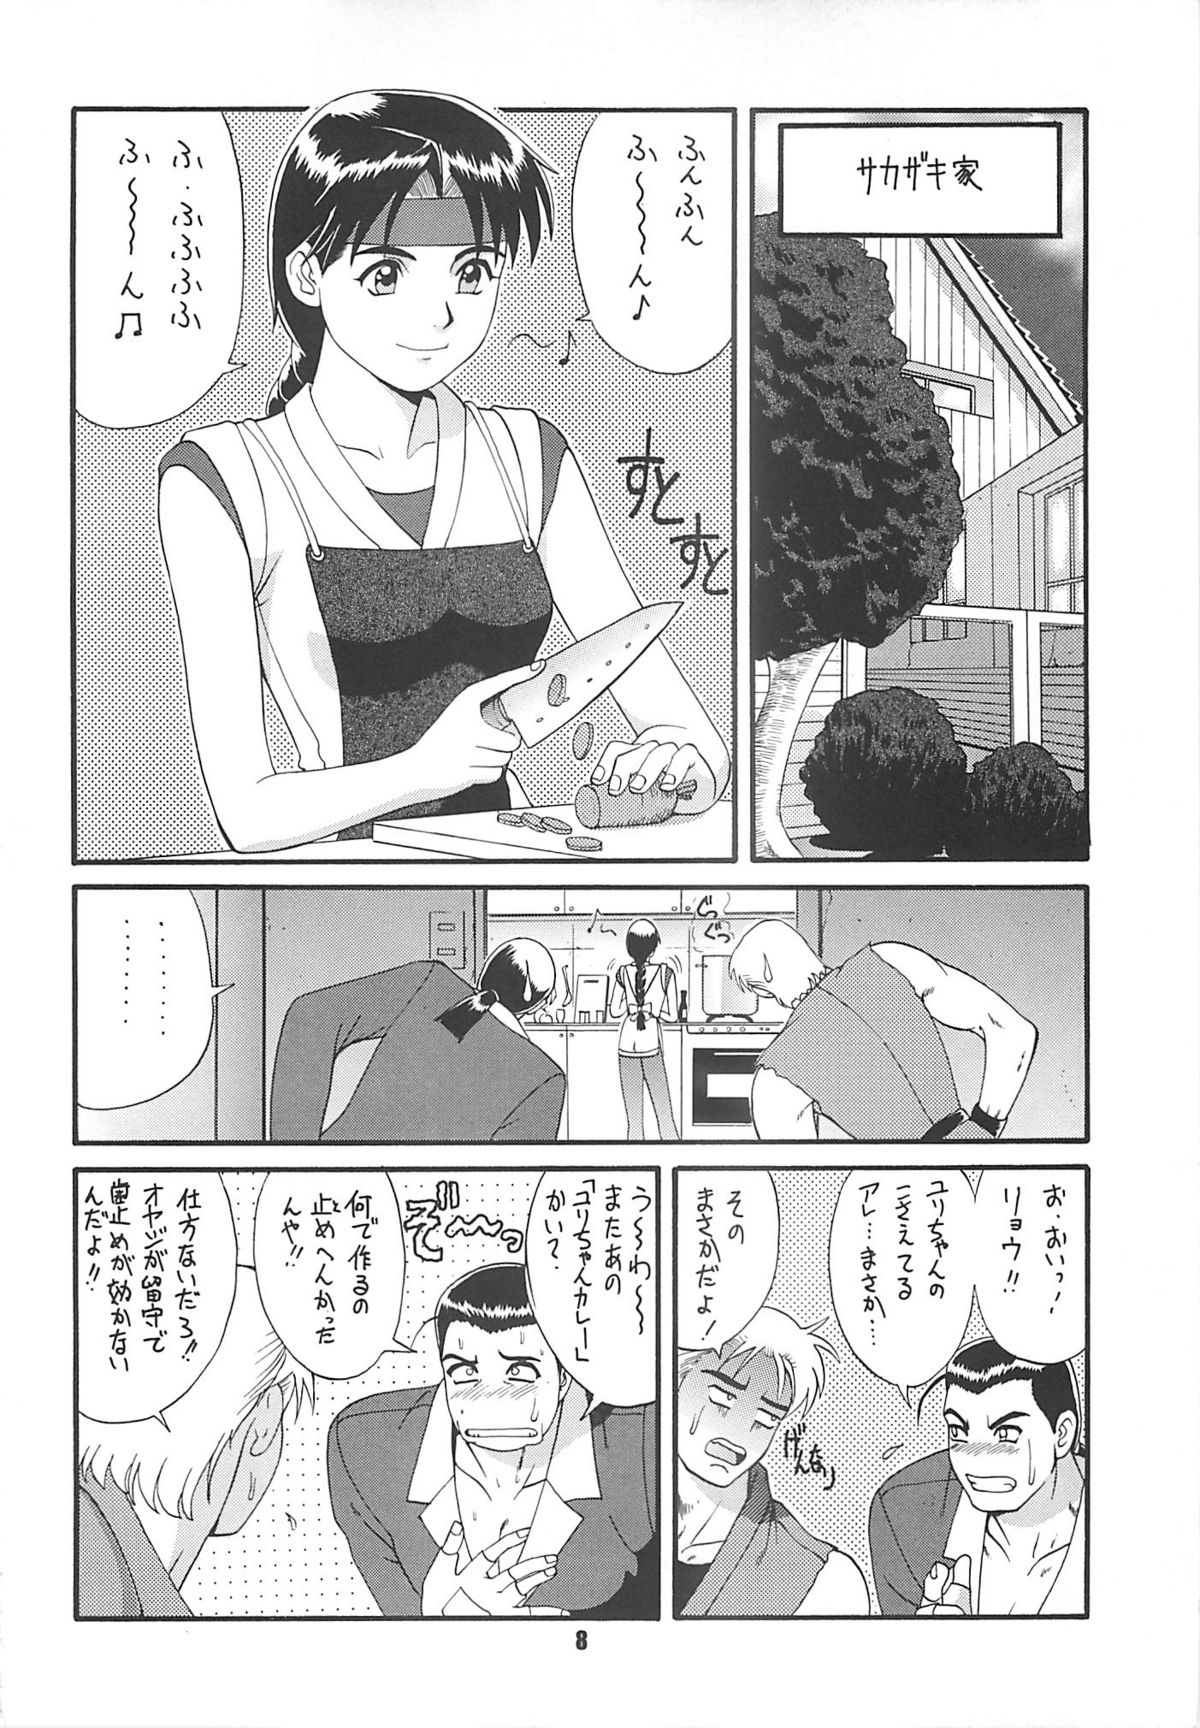 (CR22) [Saigado (Ishoku Dougen)] The Yuri & Friends '97 (King of Fighters) page 7 full